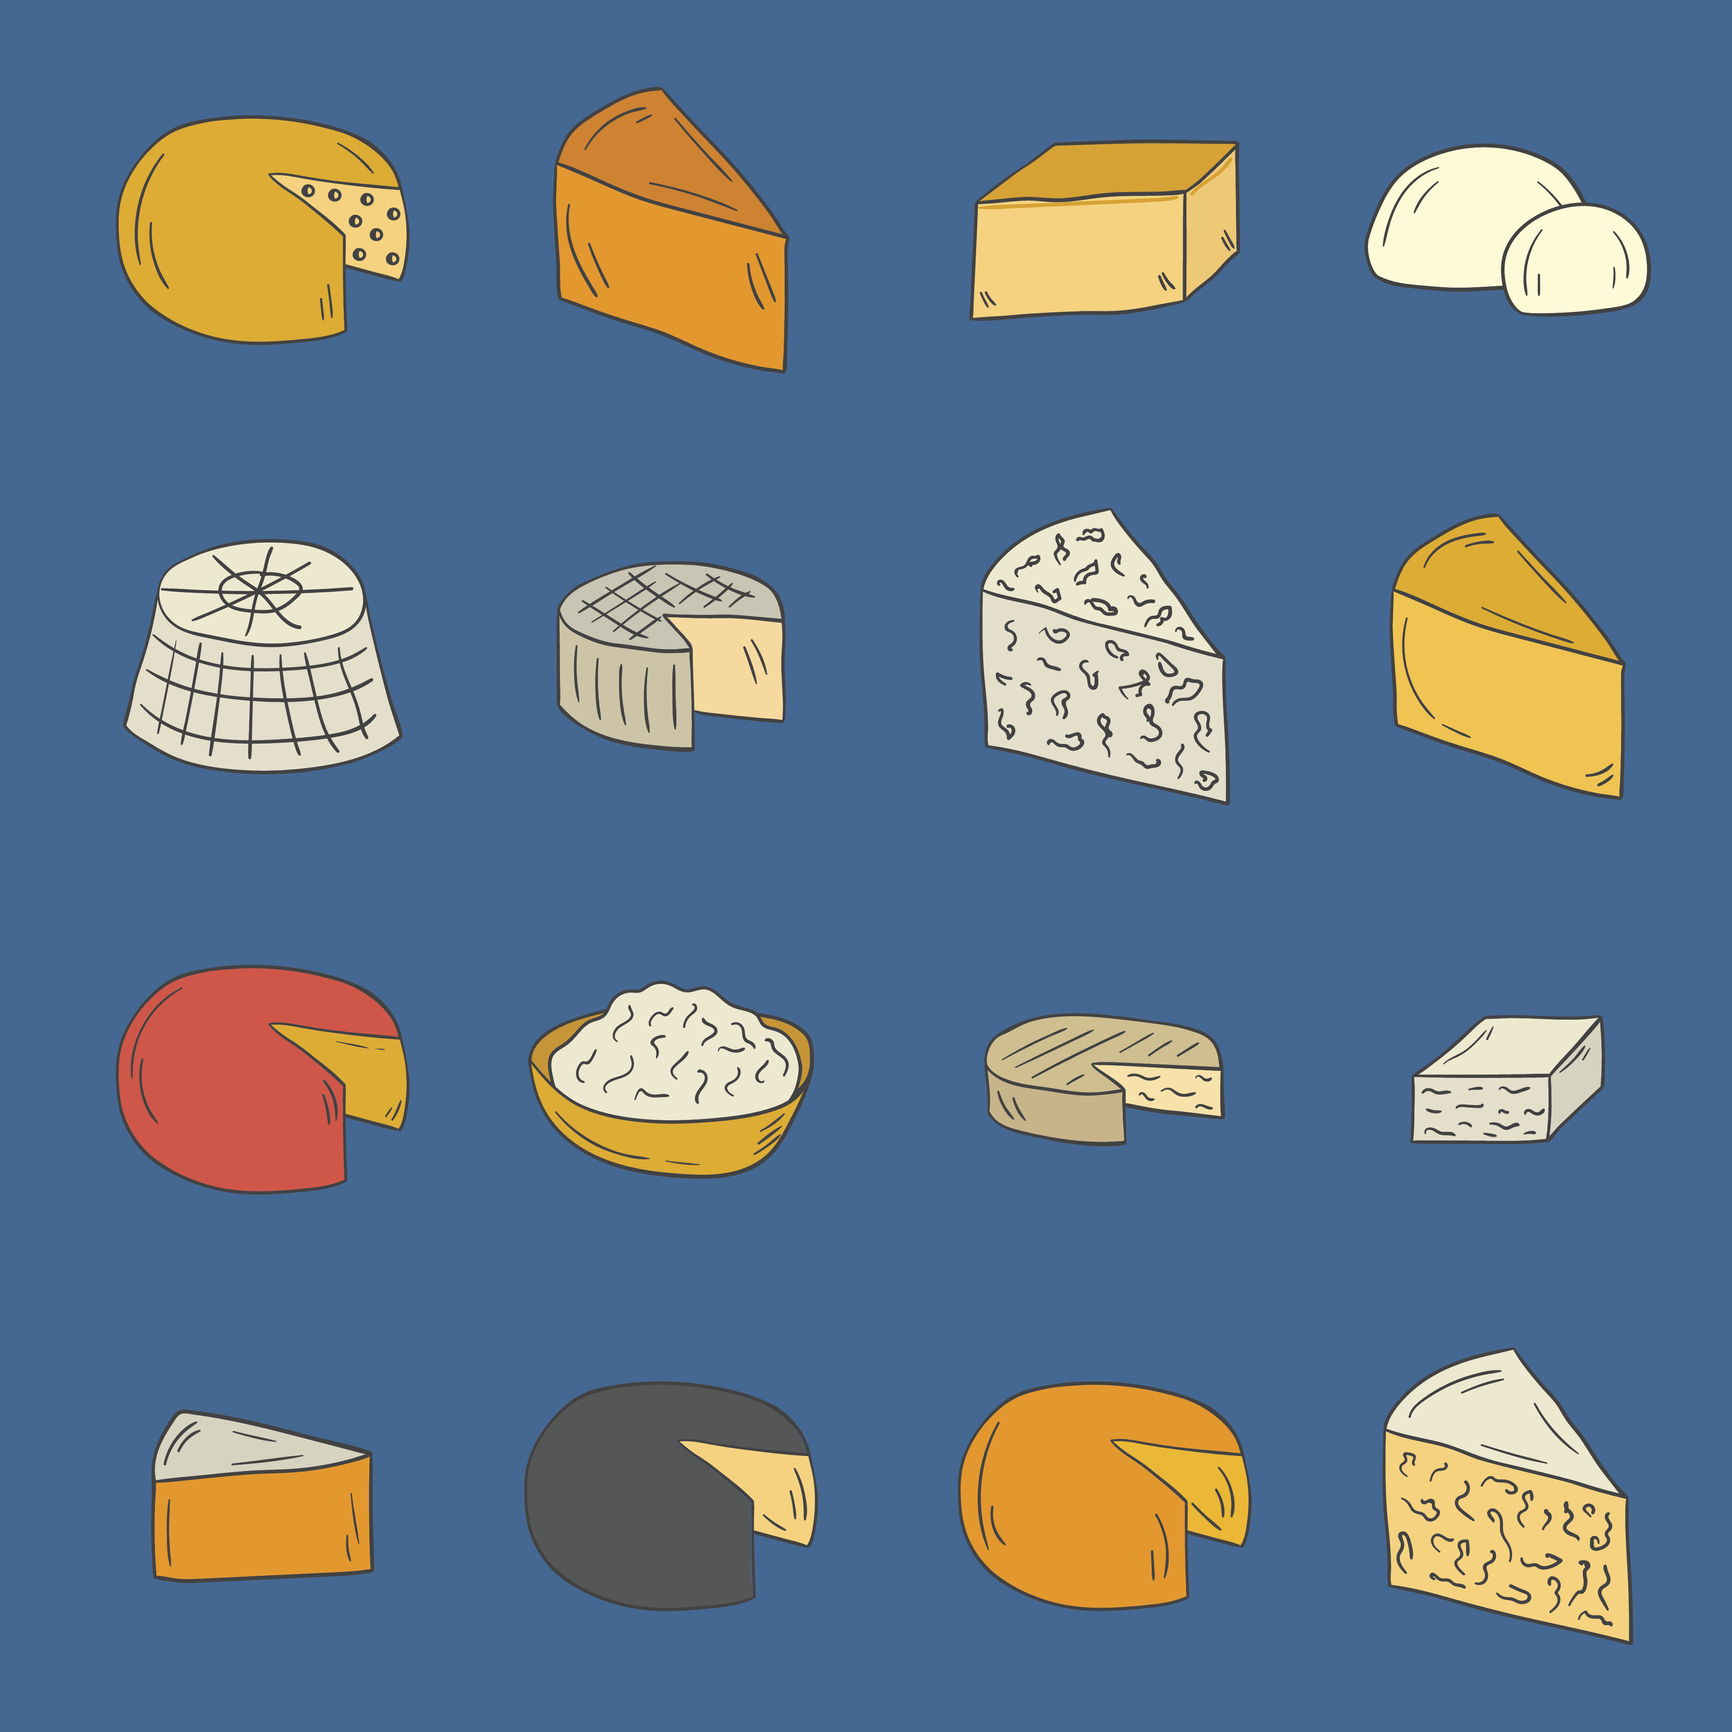 Which cheese is known for its creamy and slightly tangy flavor?